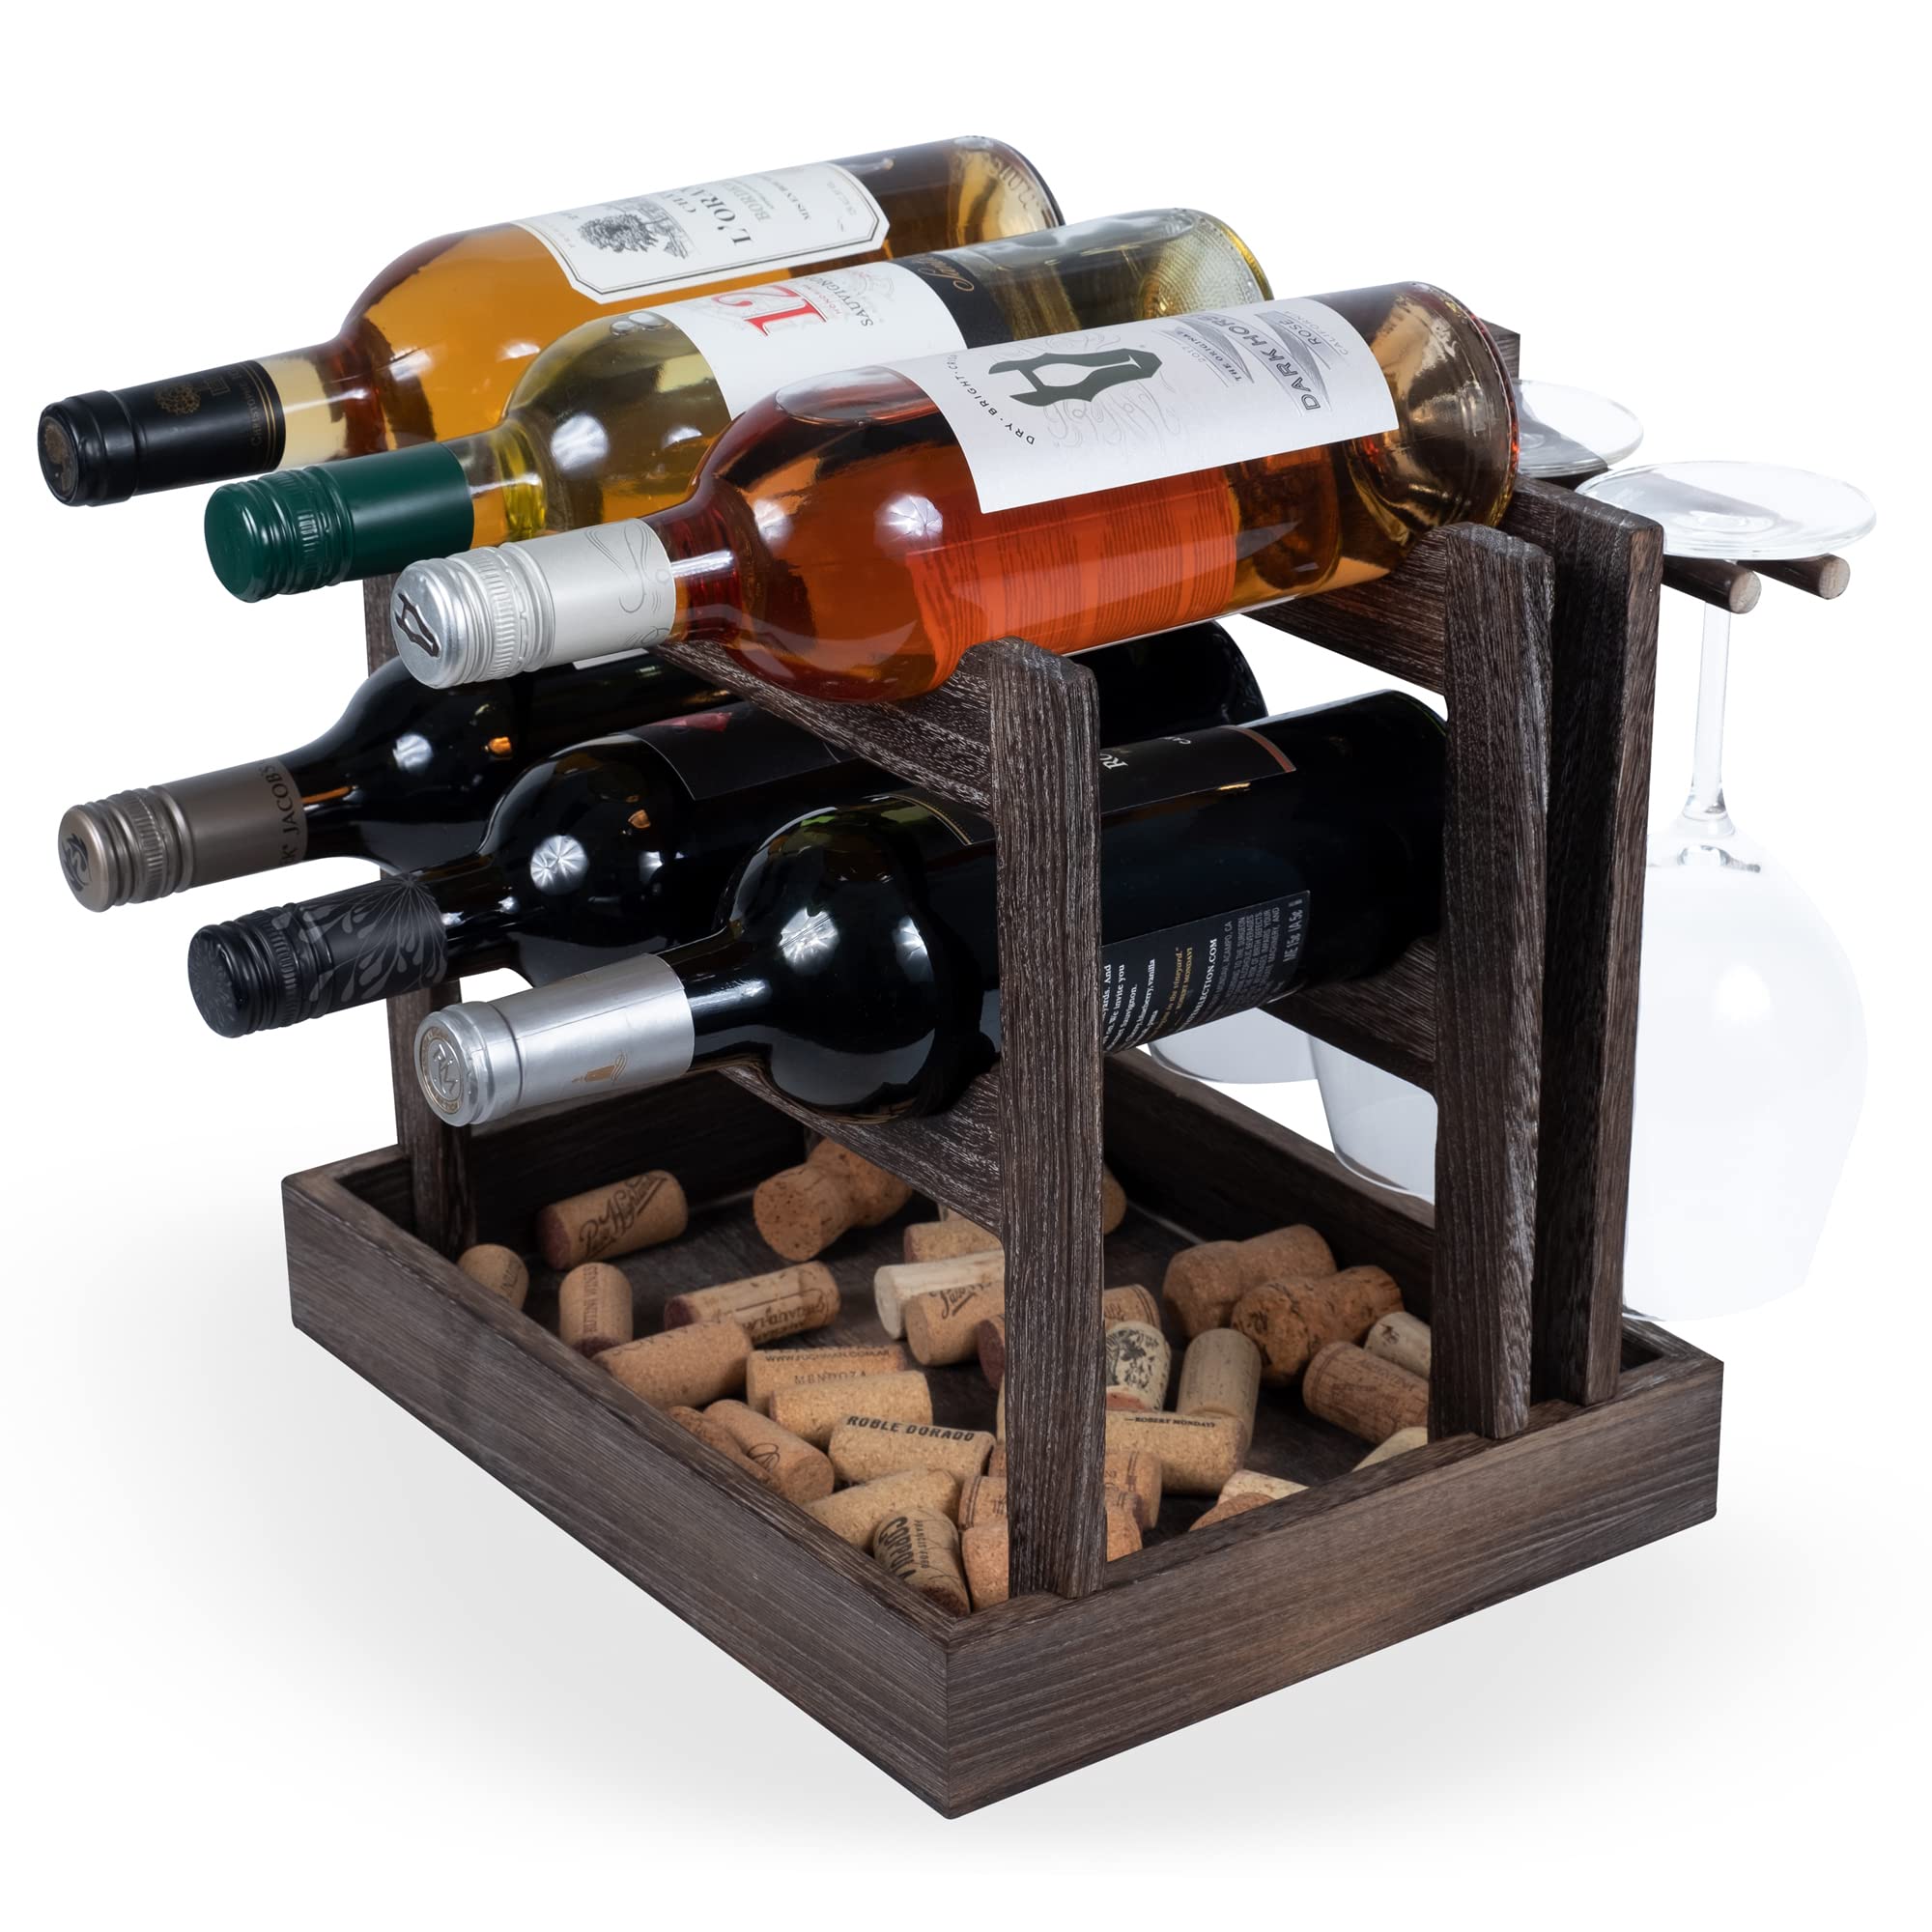 Rustic State Yapincak Countertop Wood Wine Rack for 6 Bottles and 4 Stemware Glass Holder Cork Storage Tabletop Tray Freestanding Organizer - Home, Kitchen, Dining Room Bar Décor - Burnt Brown